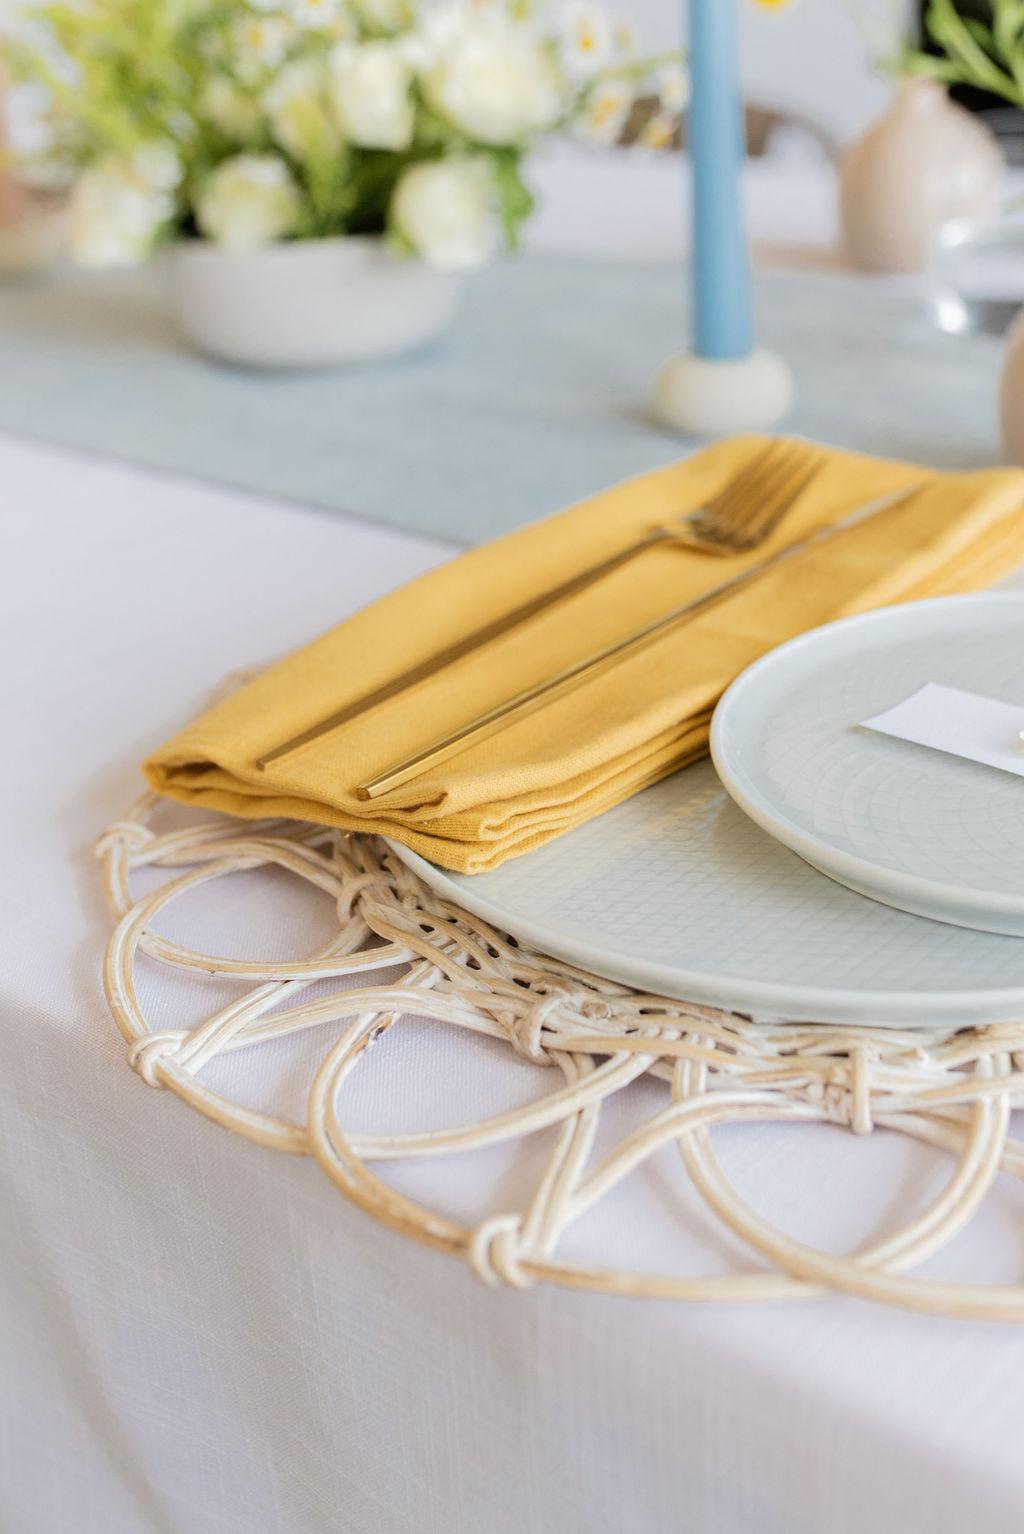 angled close up of solid yellow napkin on light coloured table setting